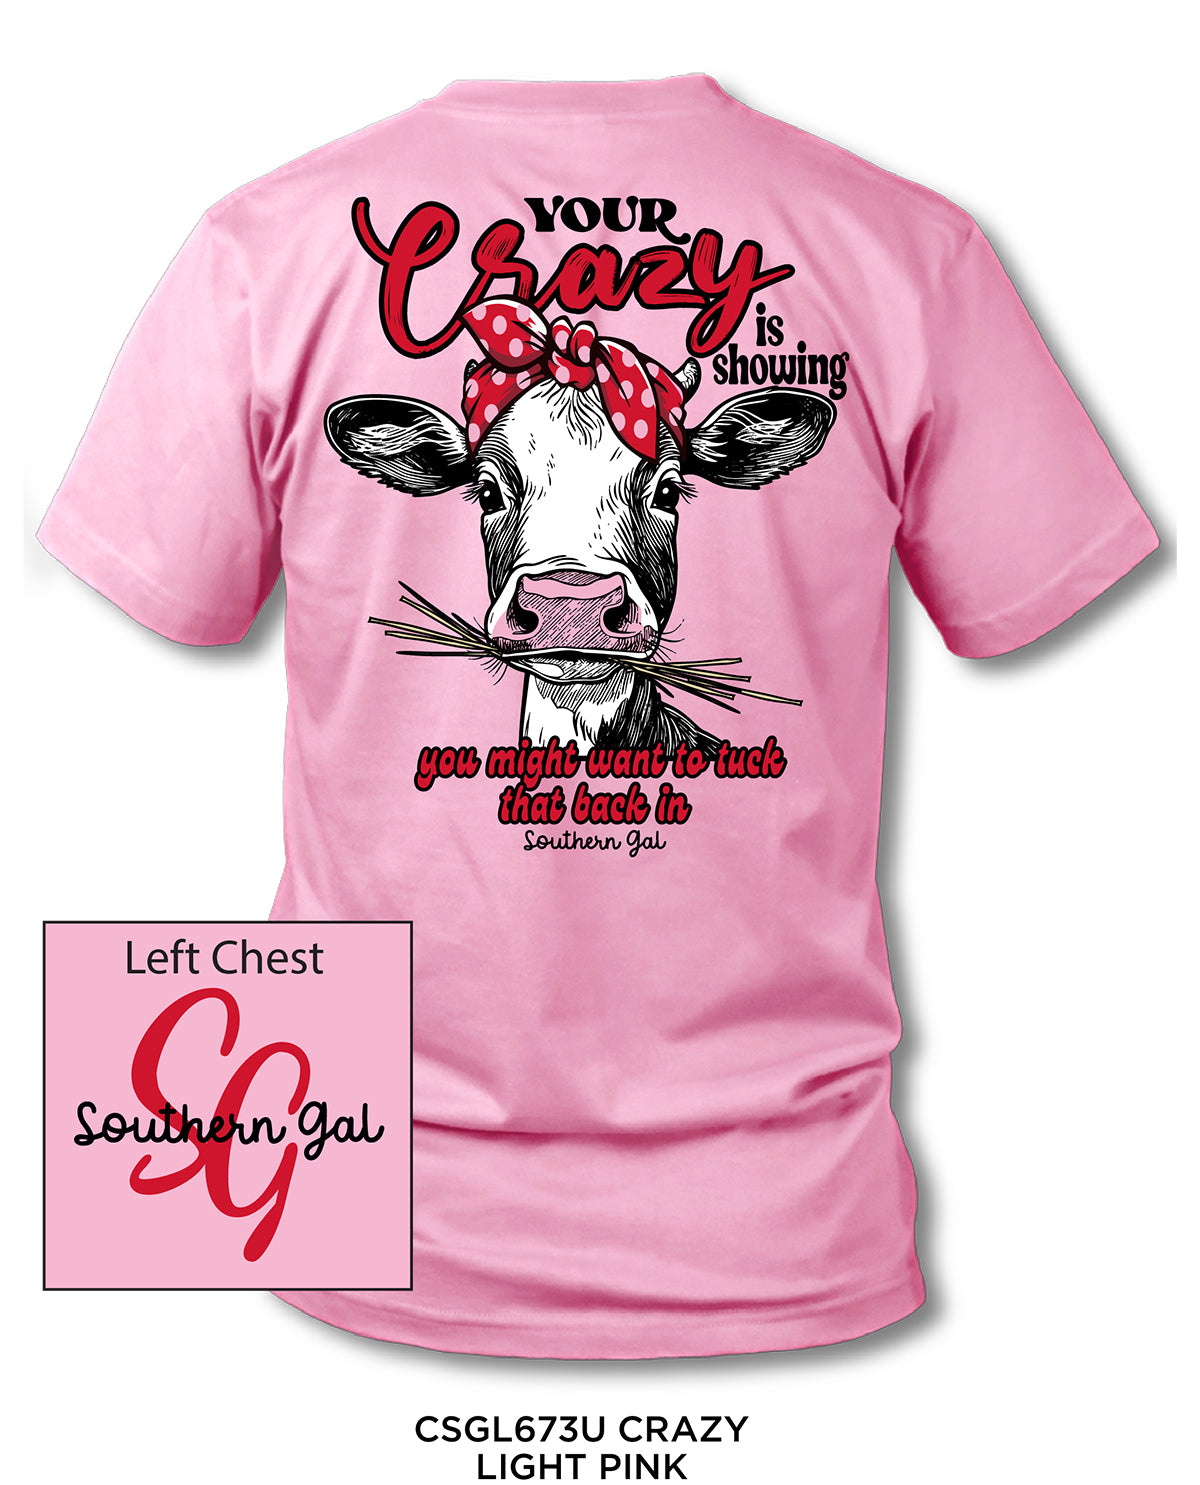 Southern Gal Crazy Screen Tee